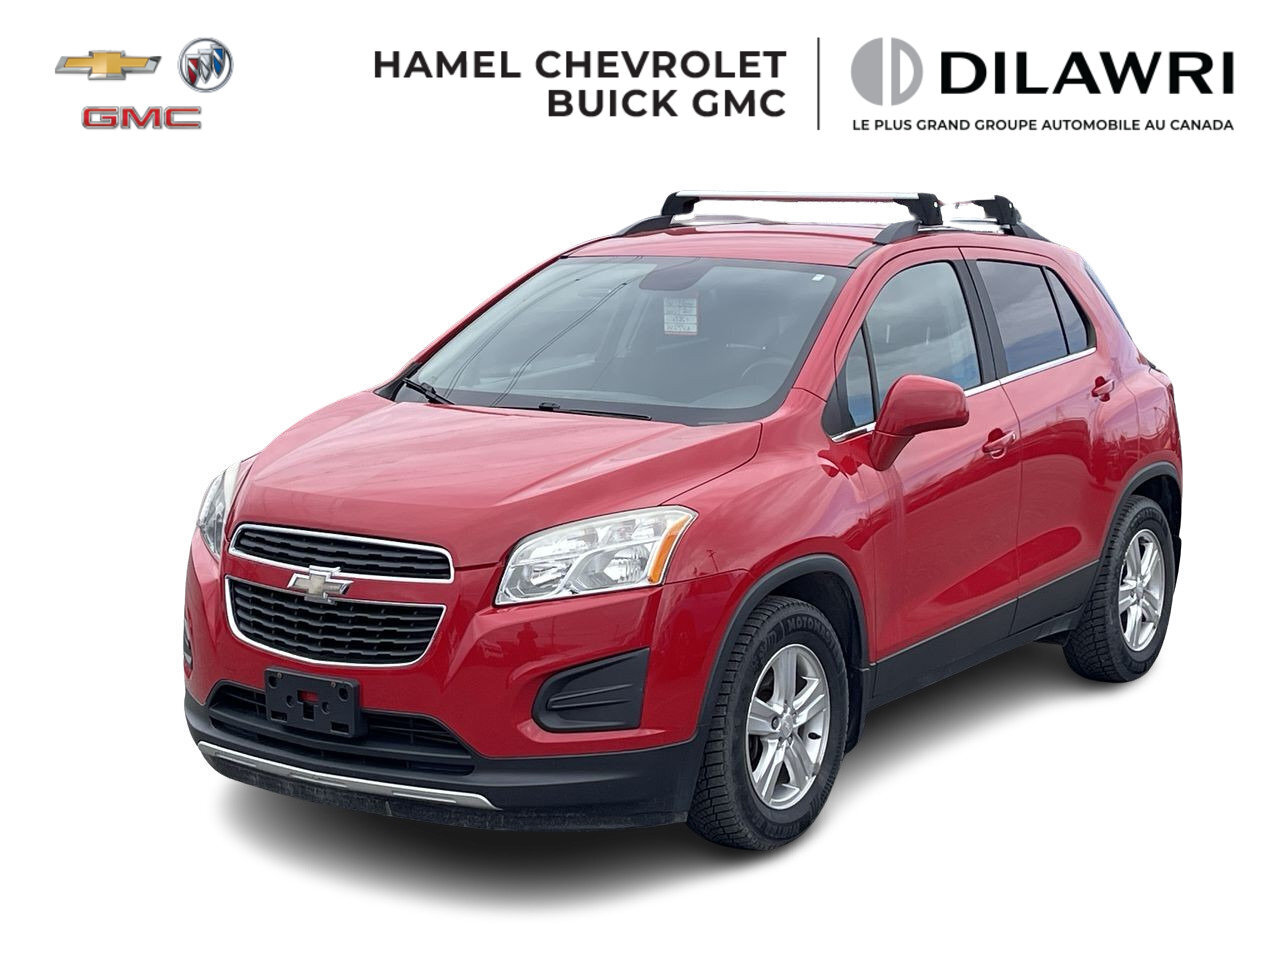 2014 Chevrolet Trax LT + CRUISE + GROUPE ELECTRIQUE + BLUETOOTH ++++++